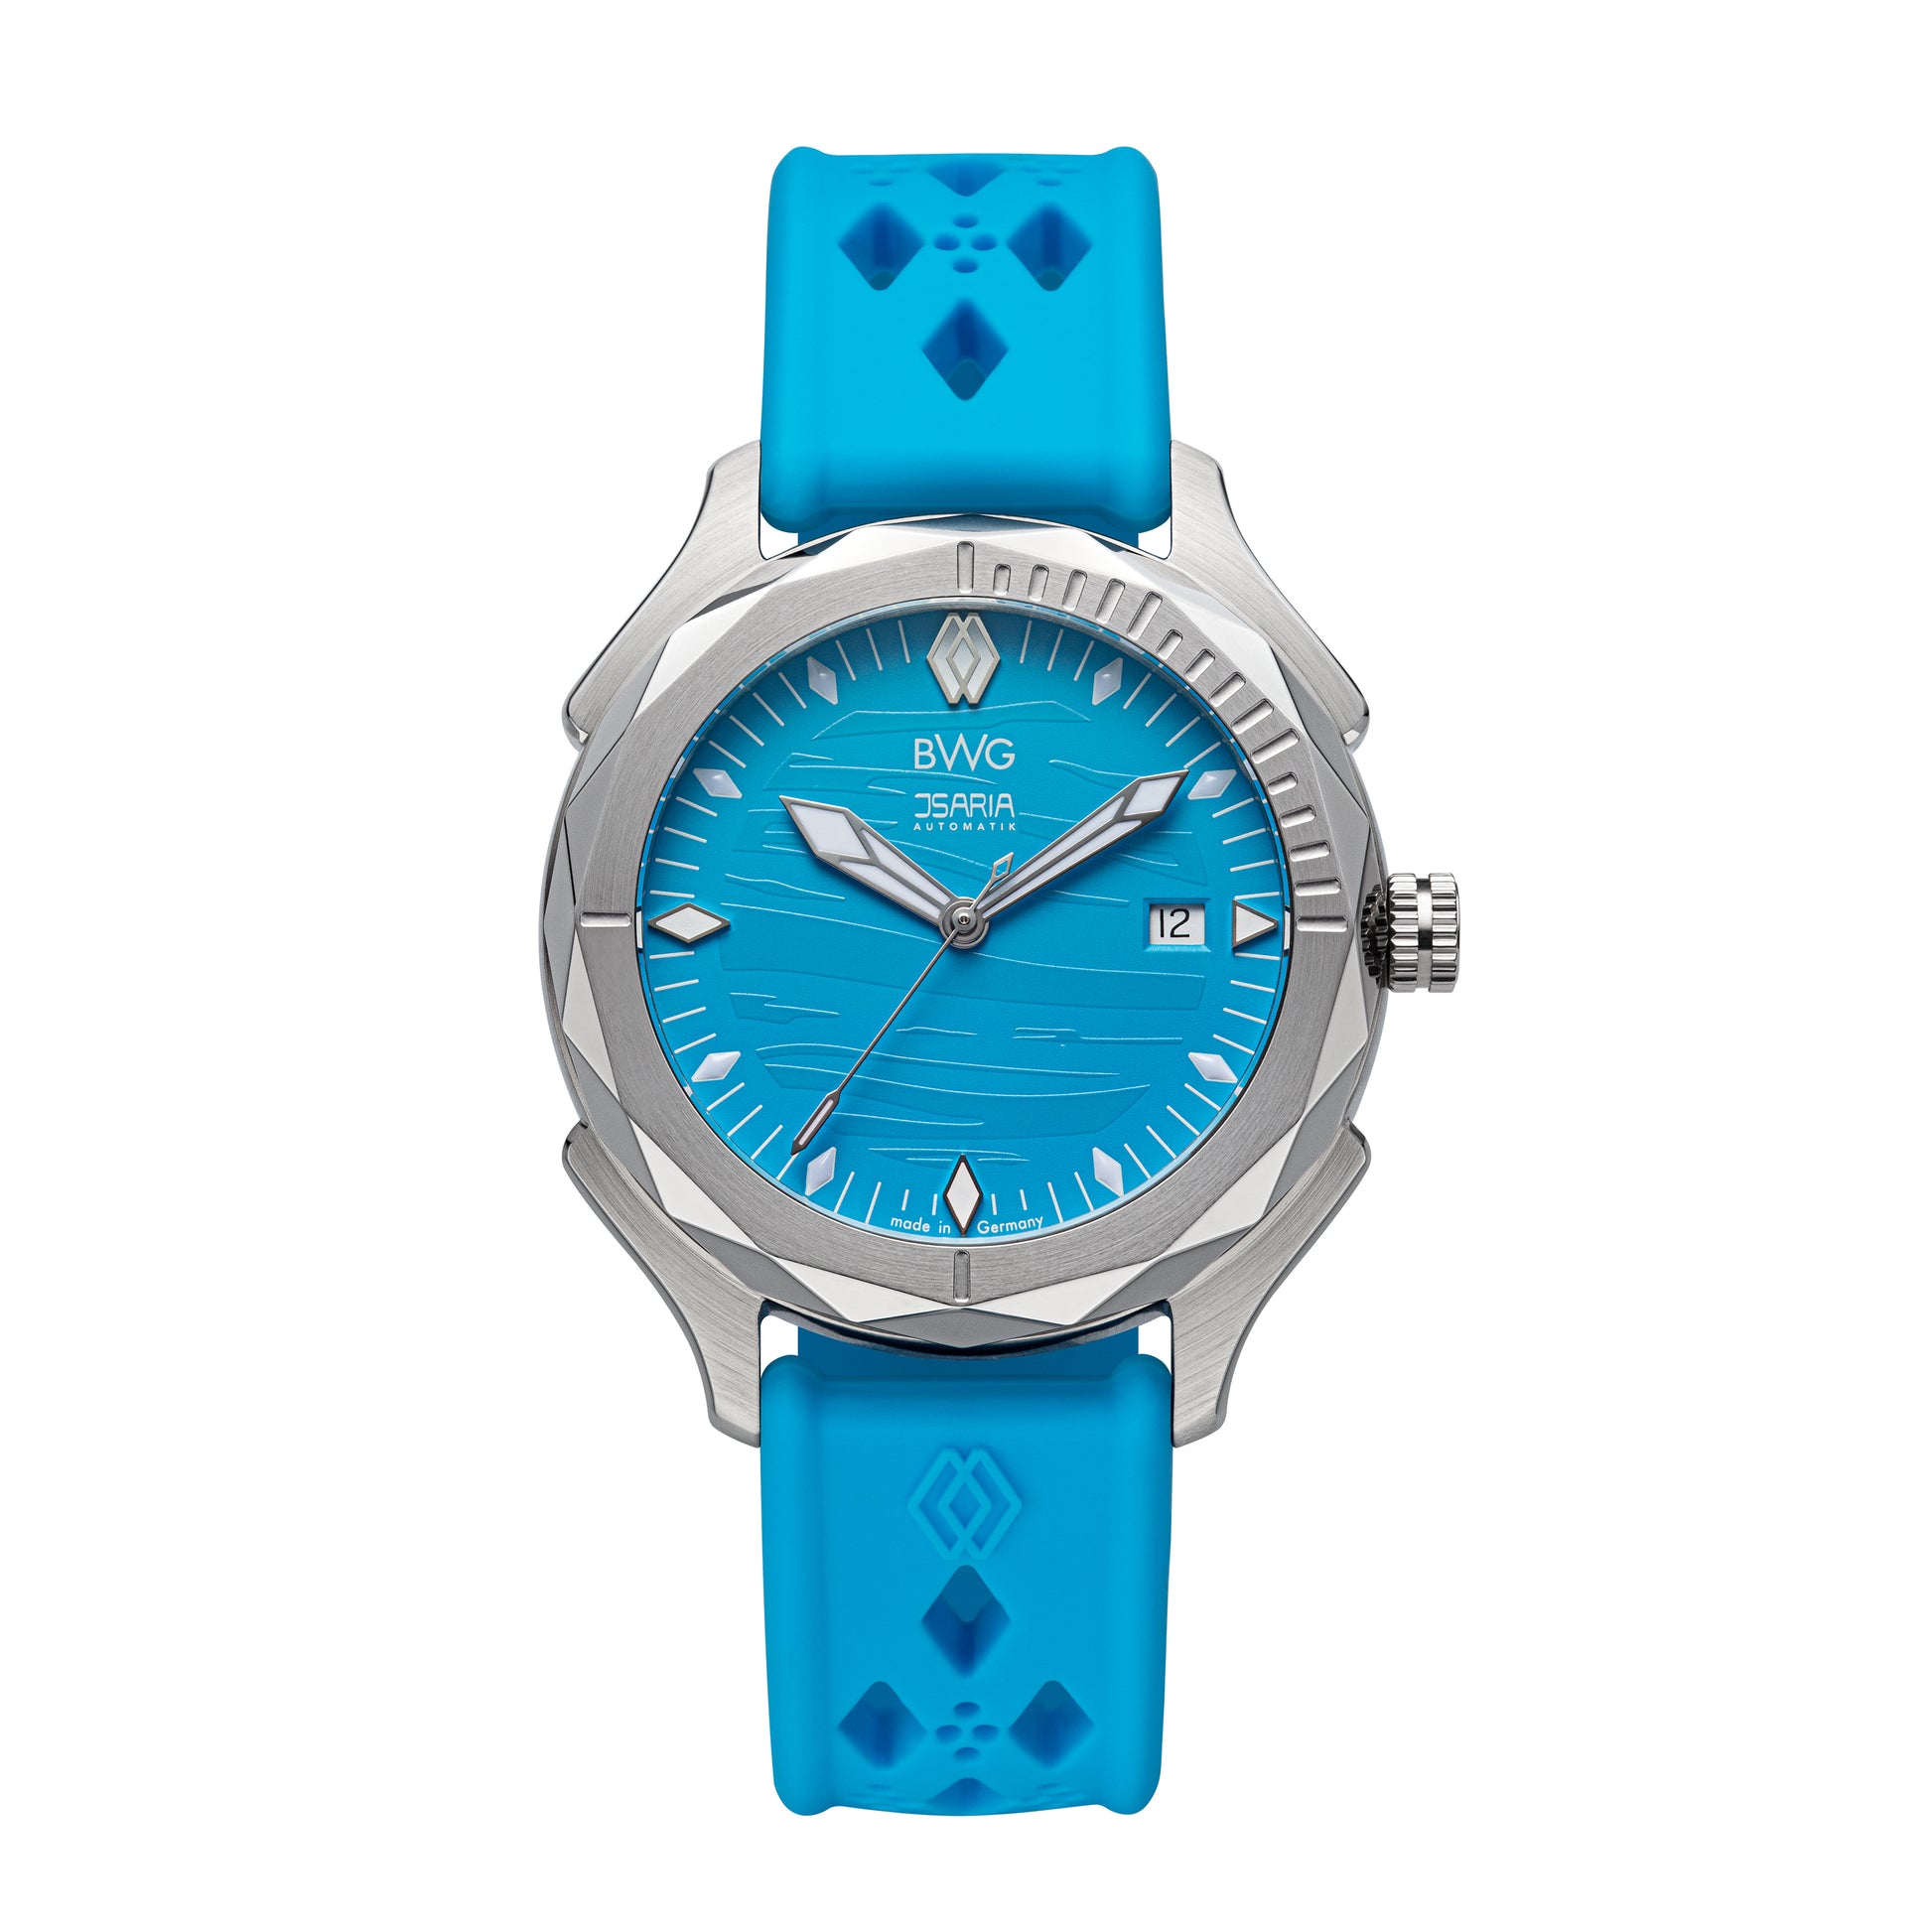 BWG-ISARIA-Automatic-watch-Swiss-Movement-Landeron-L24-manufacture-sky-blue-front